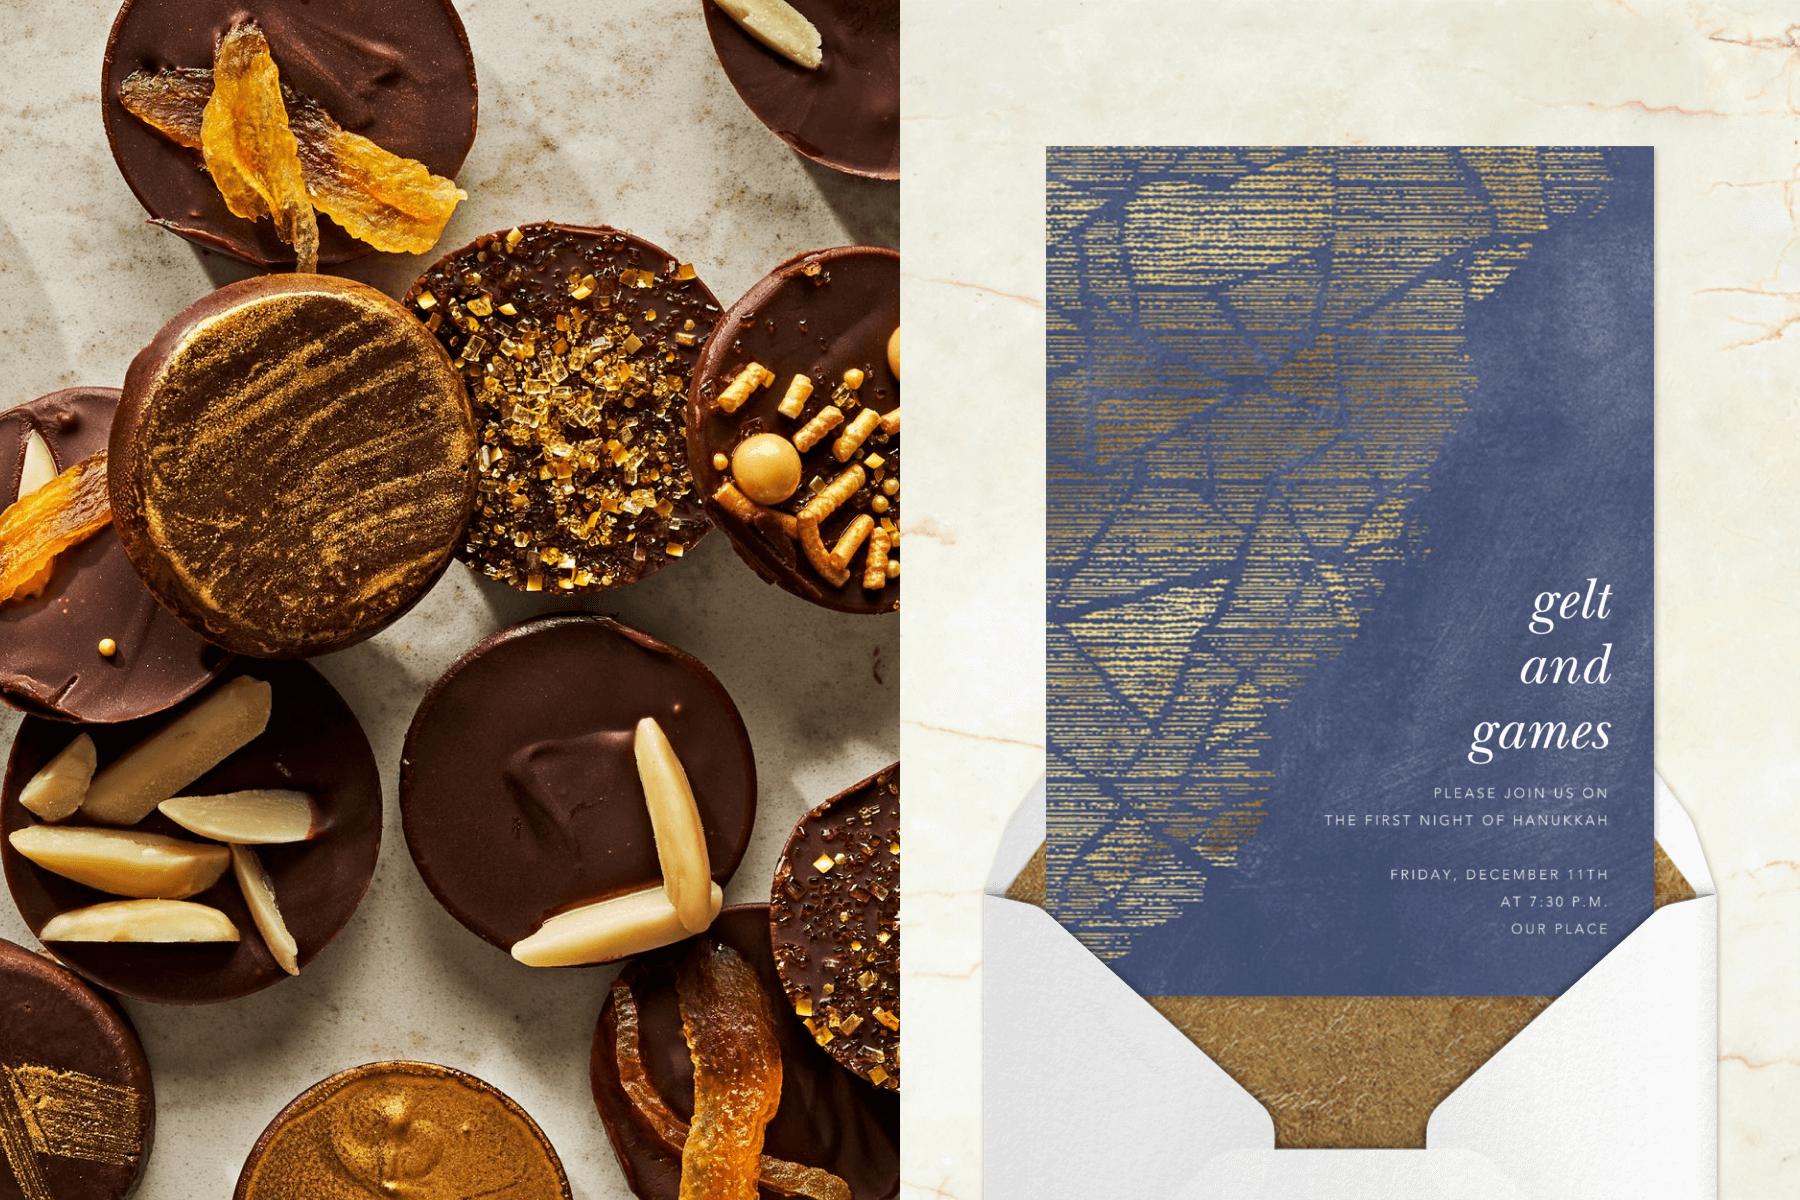 Left: Round chocolates decorated with gold dust, sugar, and sliced nuts. Right: A blue Hanukkah party invitation with sketched abstract gold shapes in the top left corner and a white envelope.